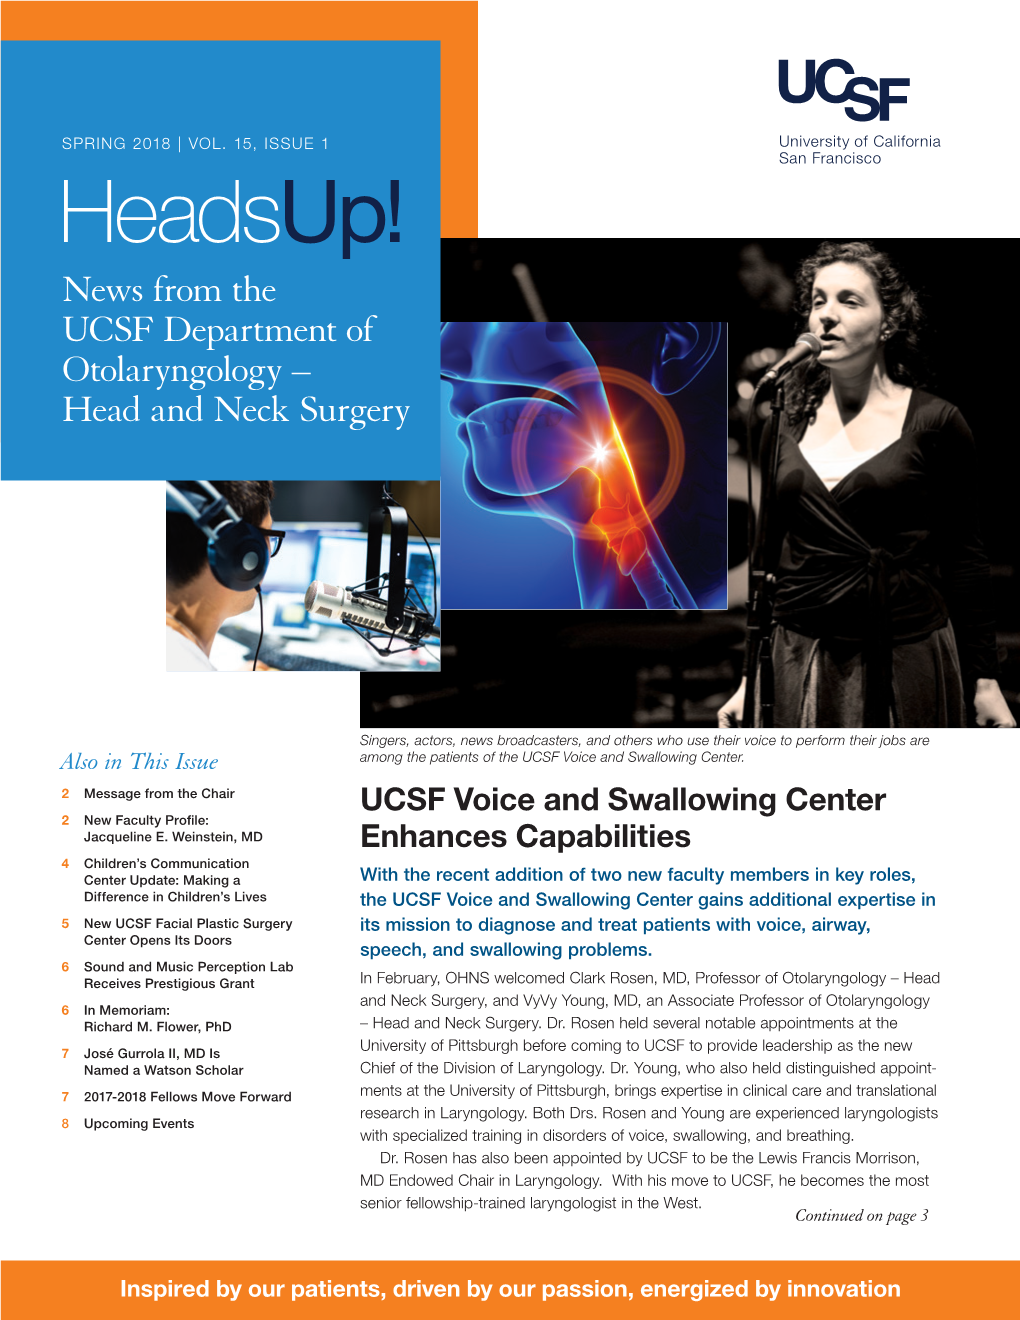 Headsup! News from the UCSF Department of Otolaryngology – Head and Neck Surgery